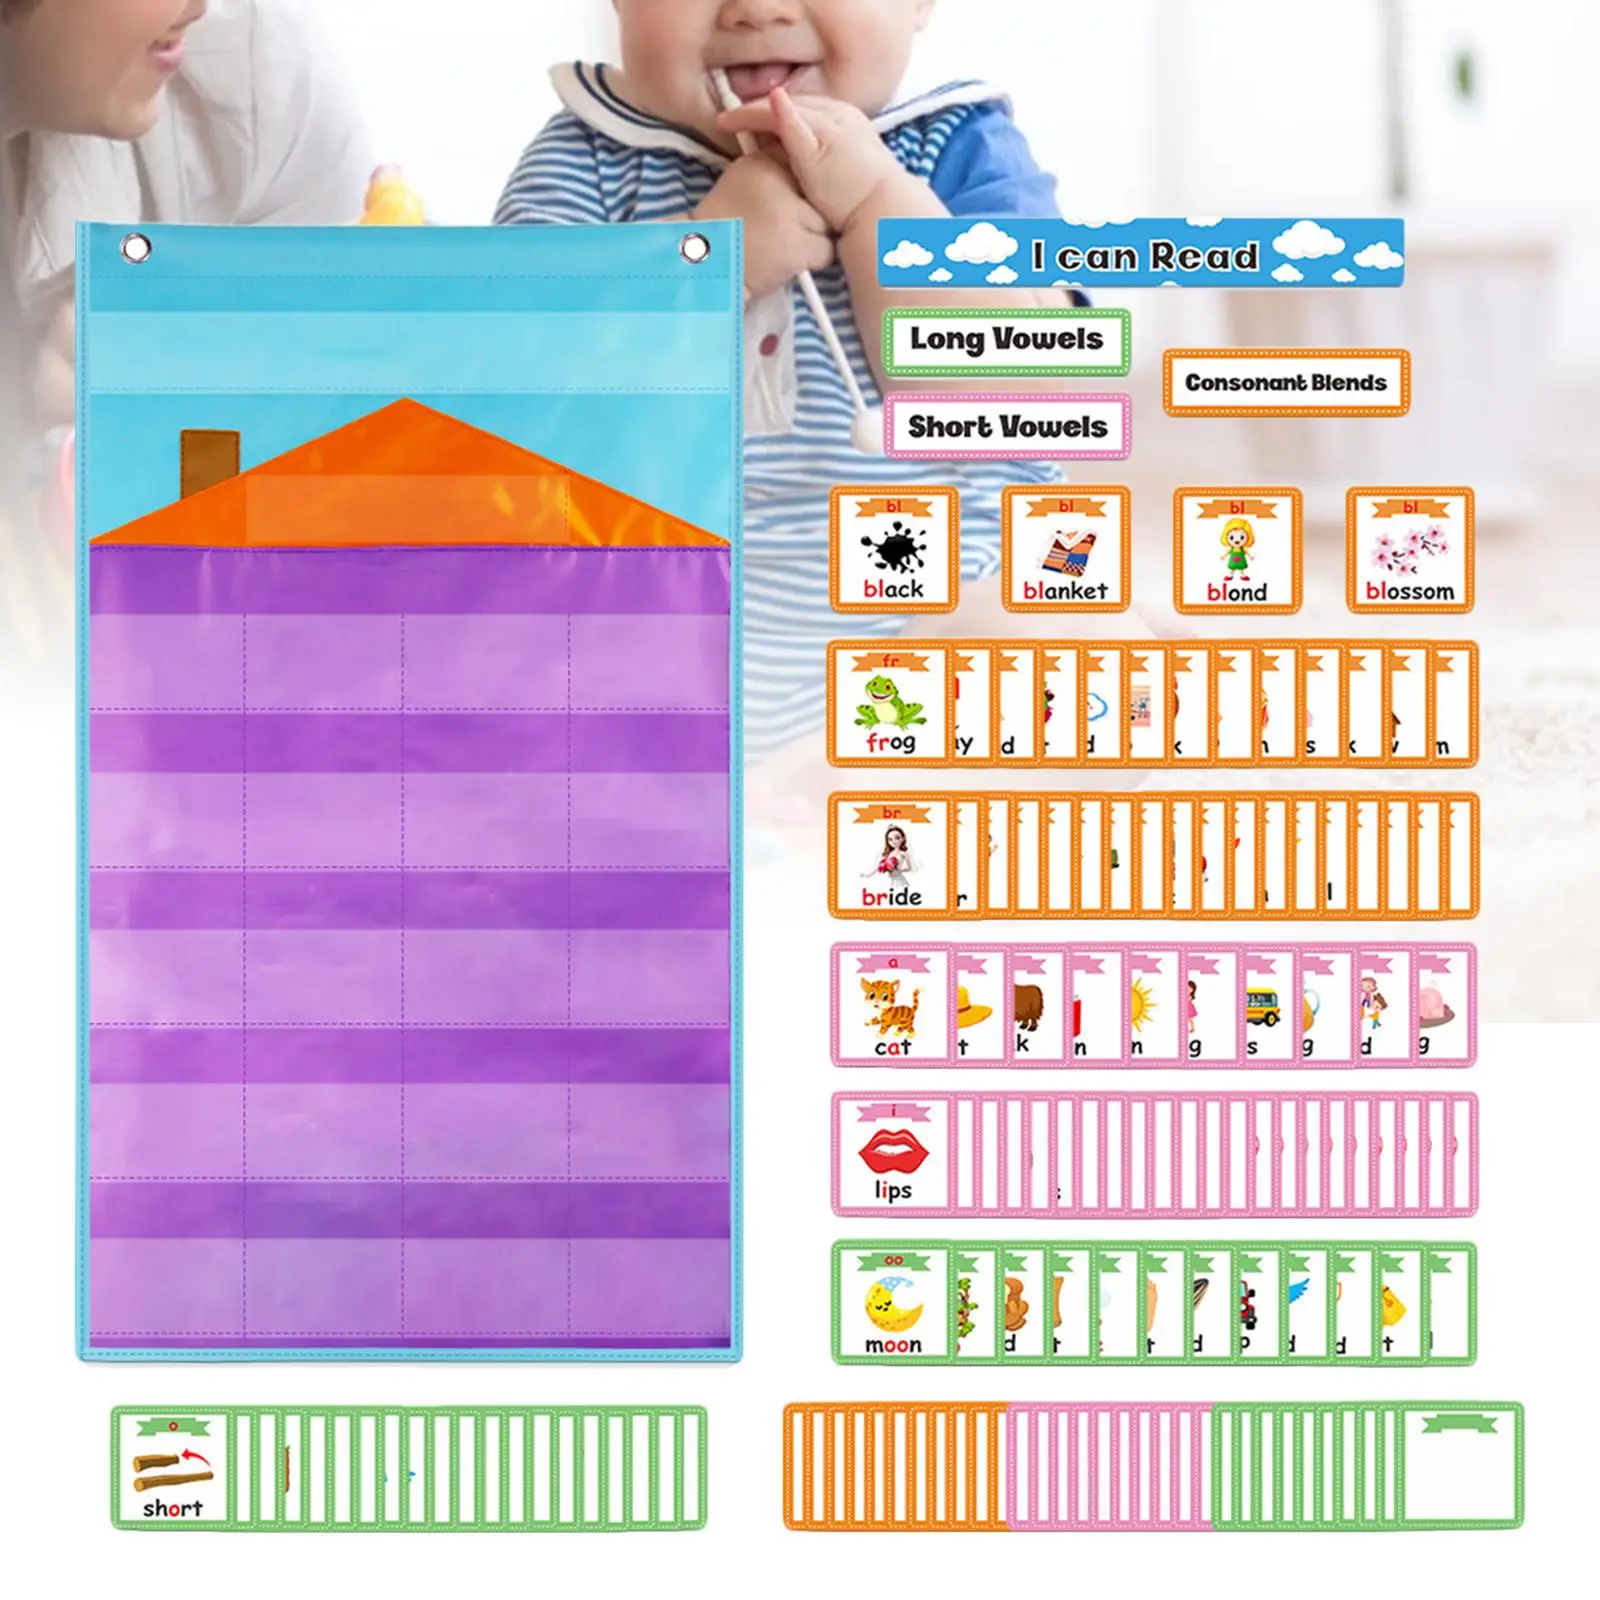 Wall Hanging Teaching Pocket Chart with 154 Vowel Card Grammer Learning English Teaching Prop for Kids Educational Teacher